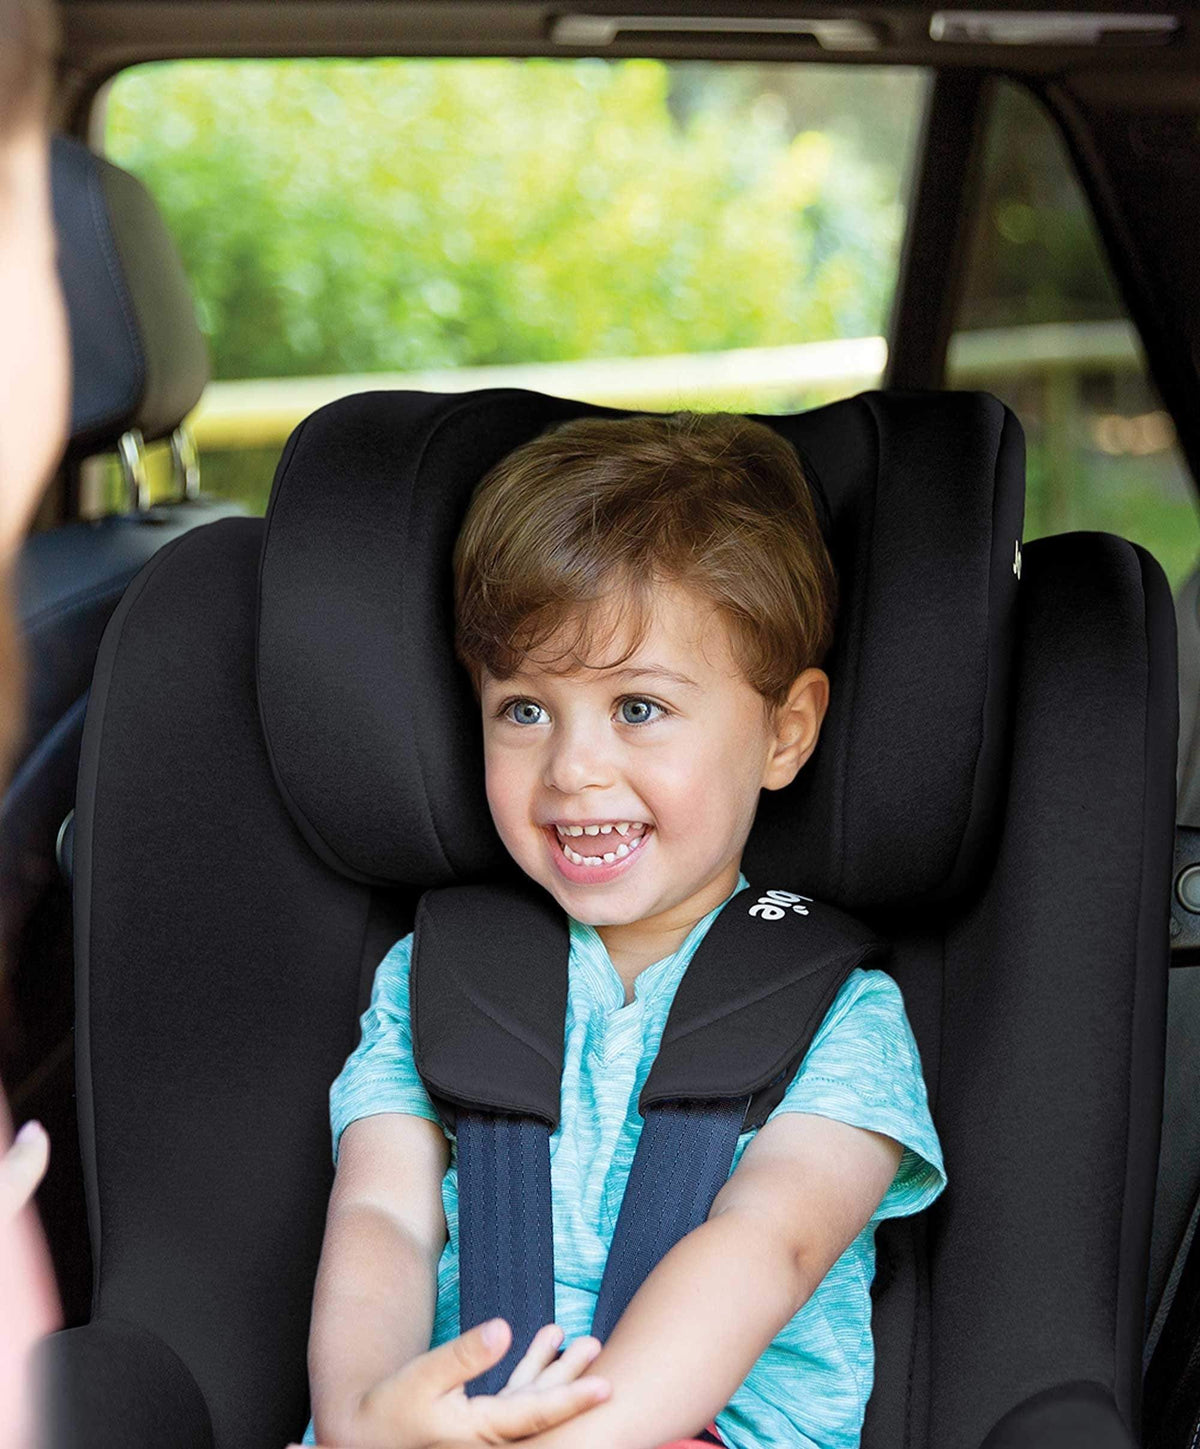 Joie Spin 360 iSize Car Seat in Coal